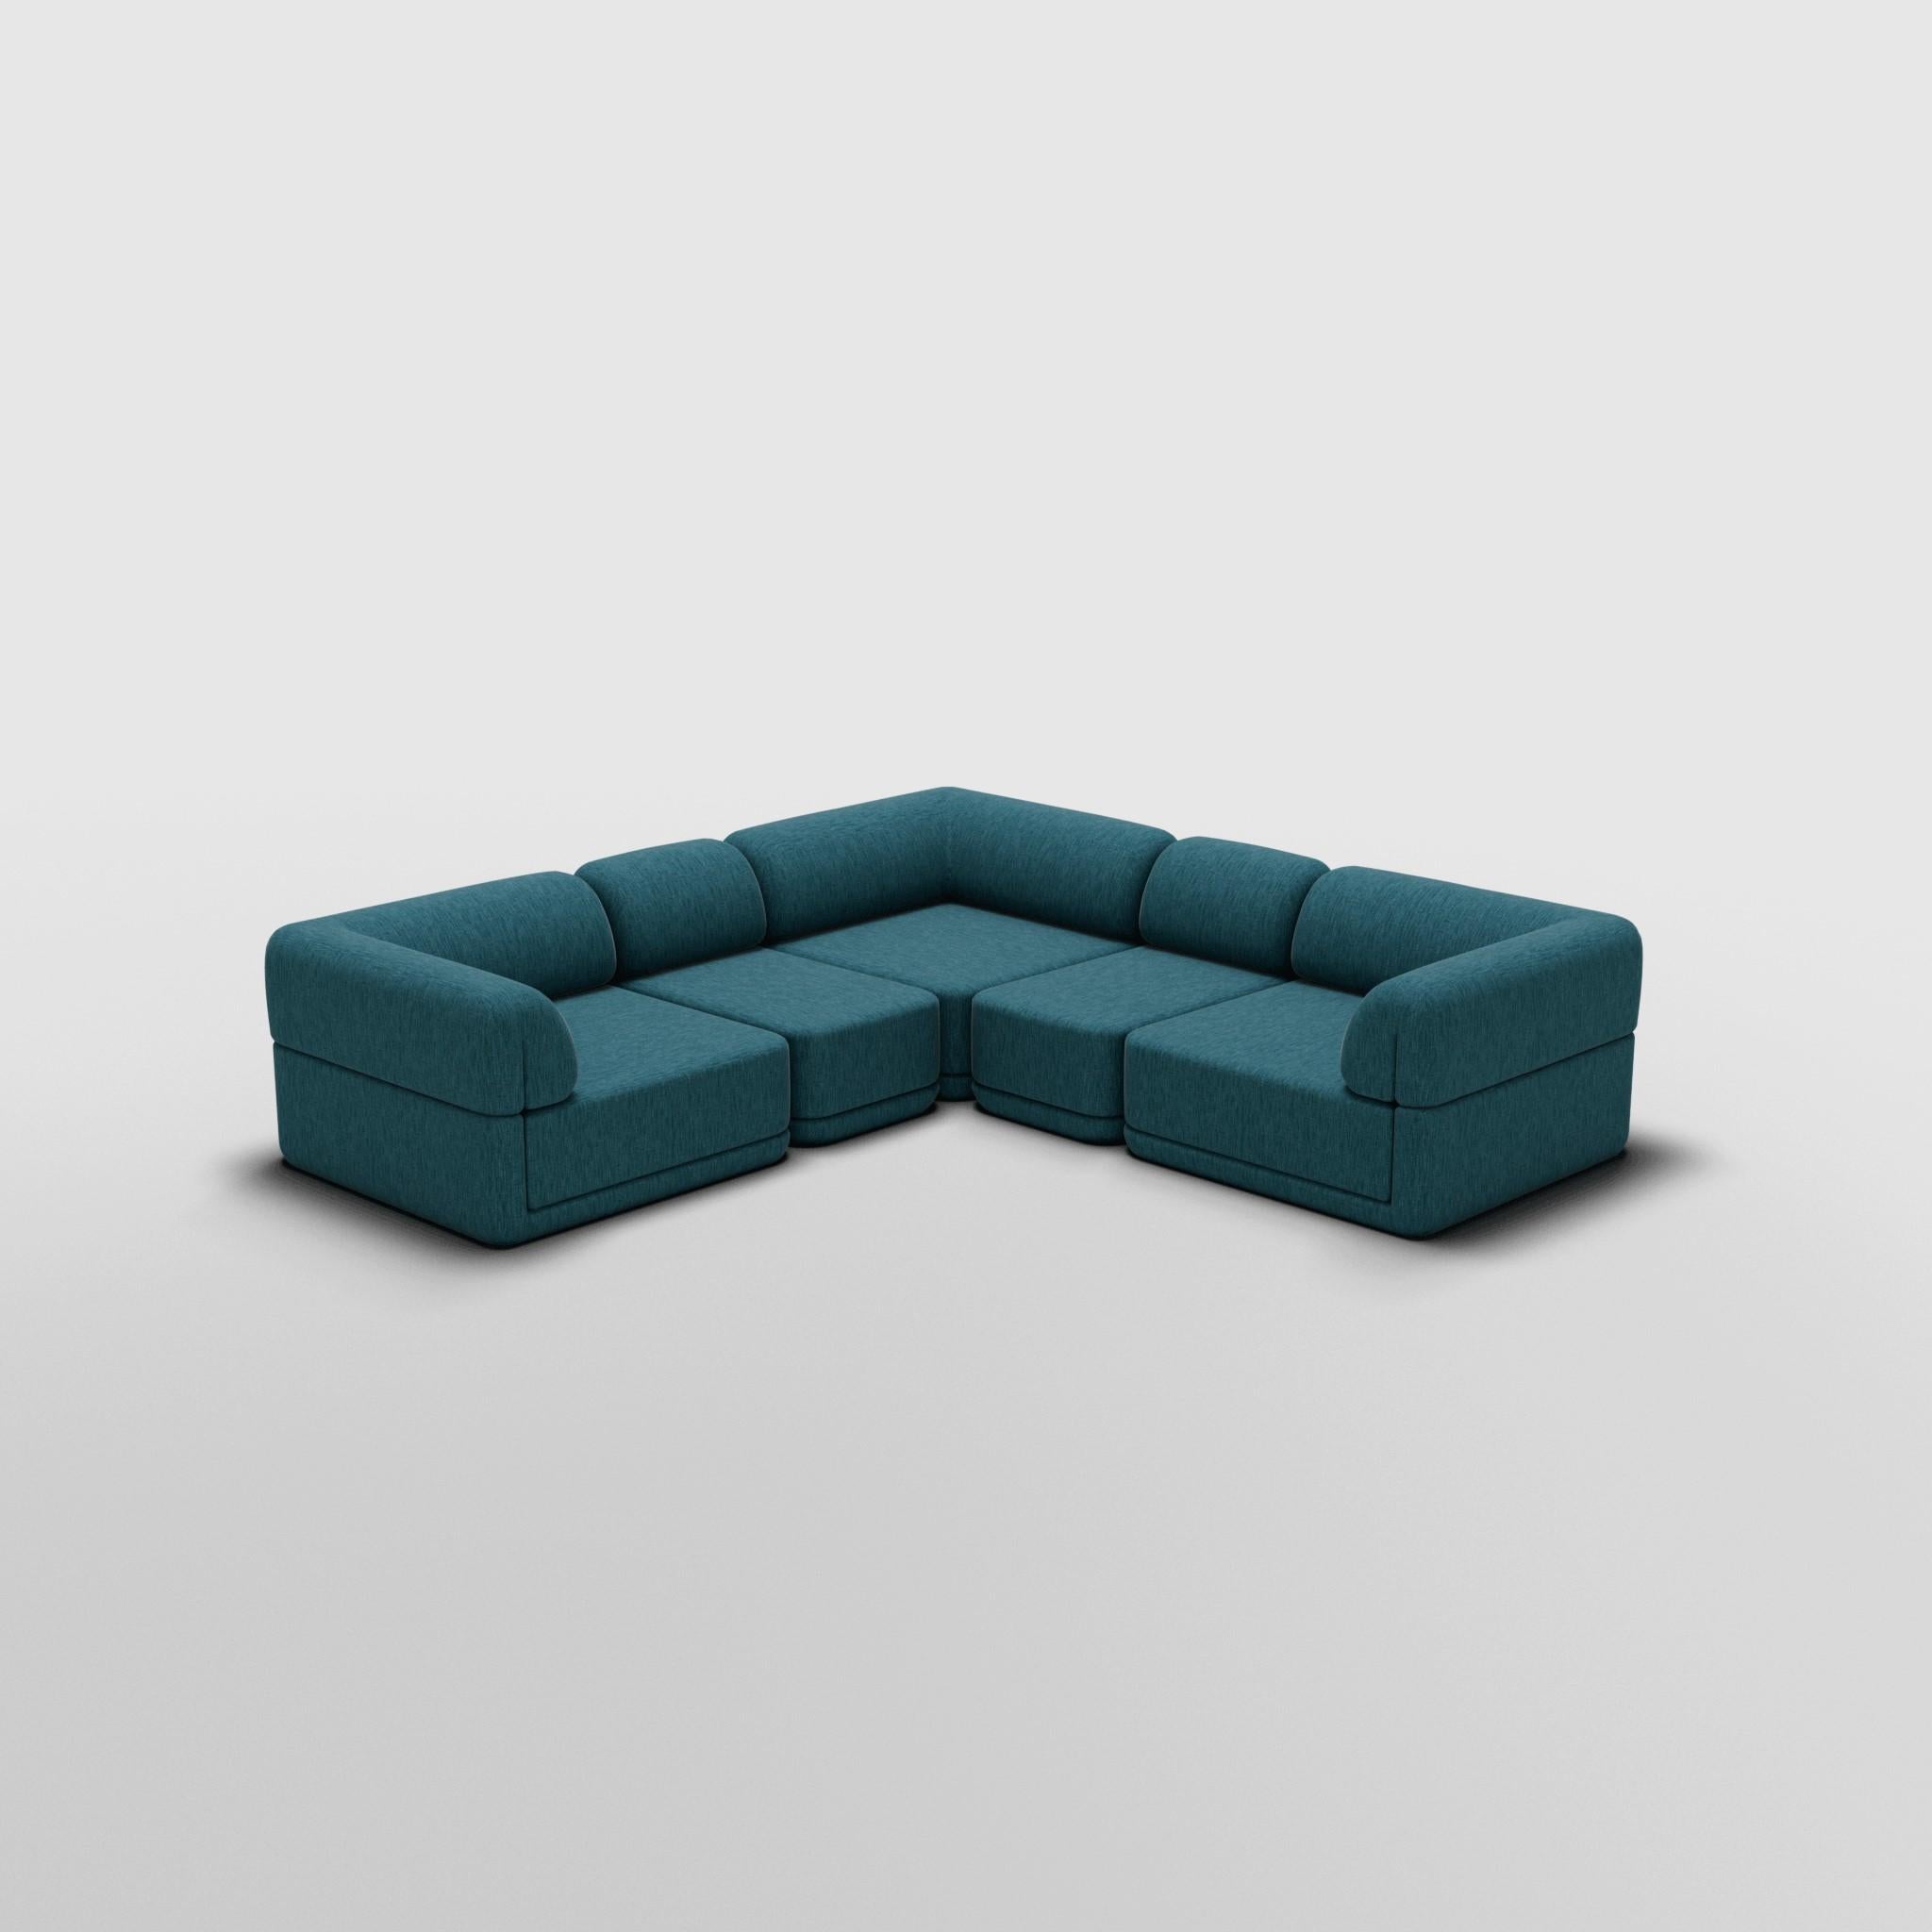 Corners & Slims - Inspired by 70s Italian Luxury Furniture

Discover The Cube Sofa, where art meets adaptability. Its sculptural design and customizable comfort create endless possibilities for your living space. Make a statement, elevate your